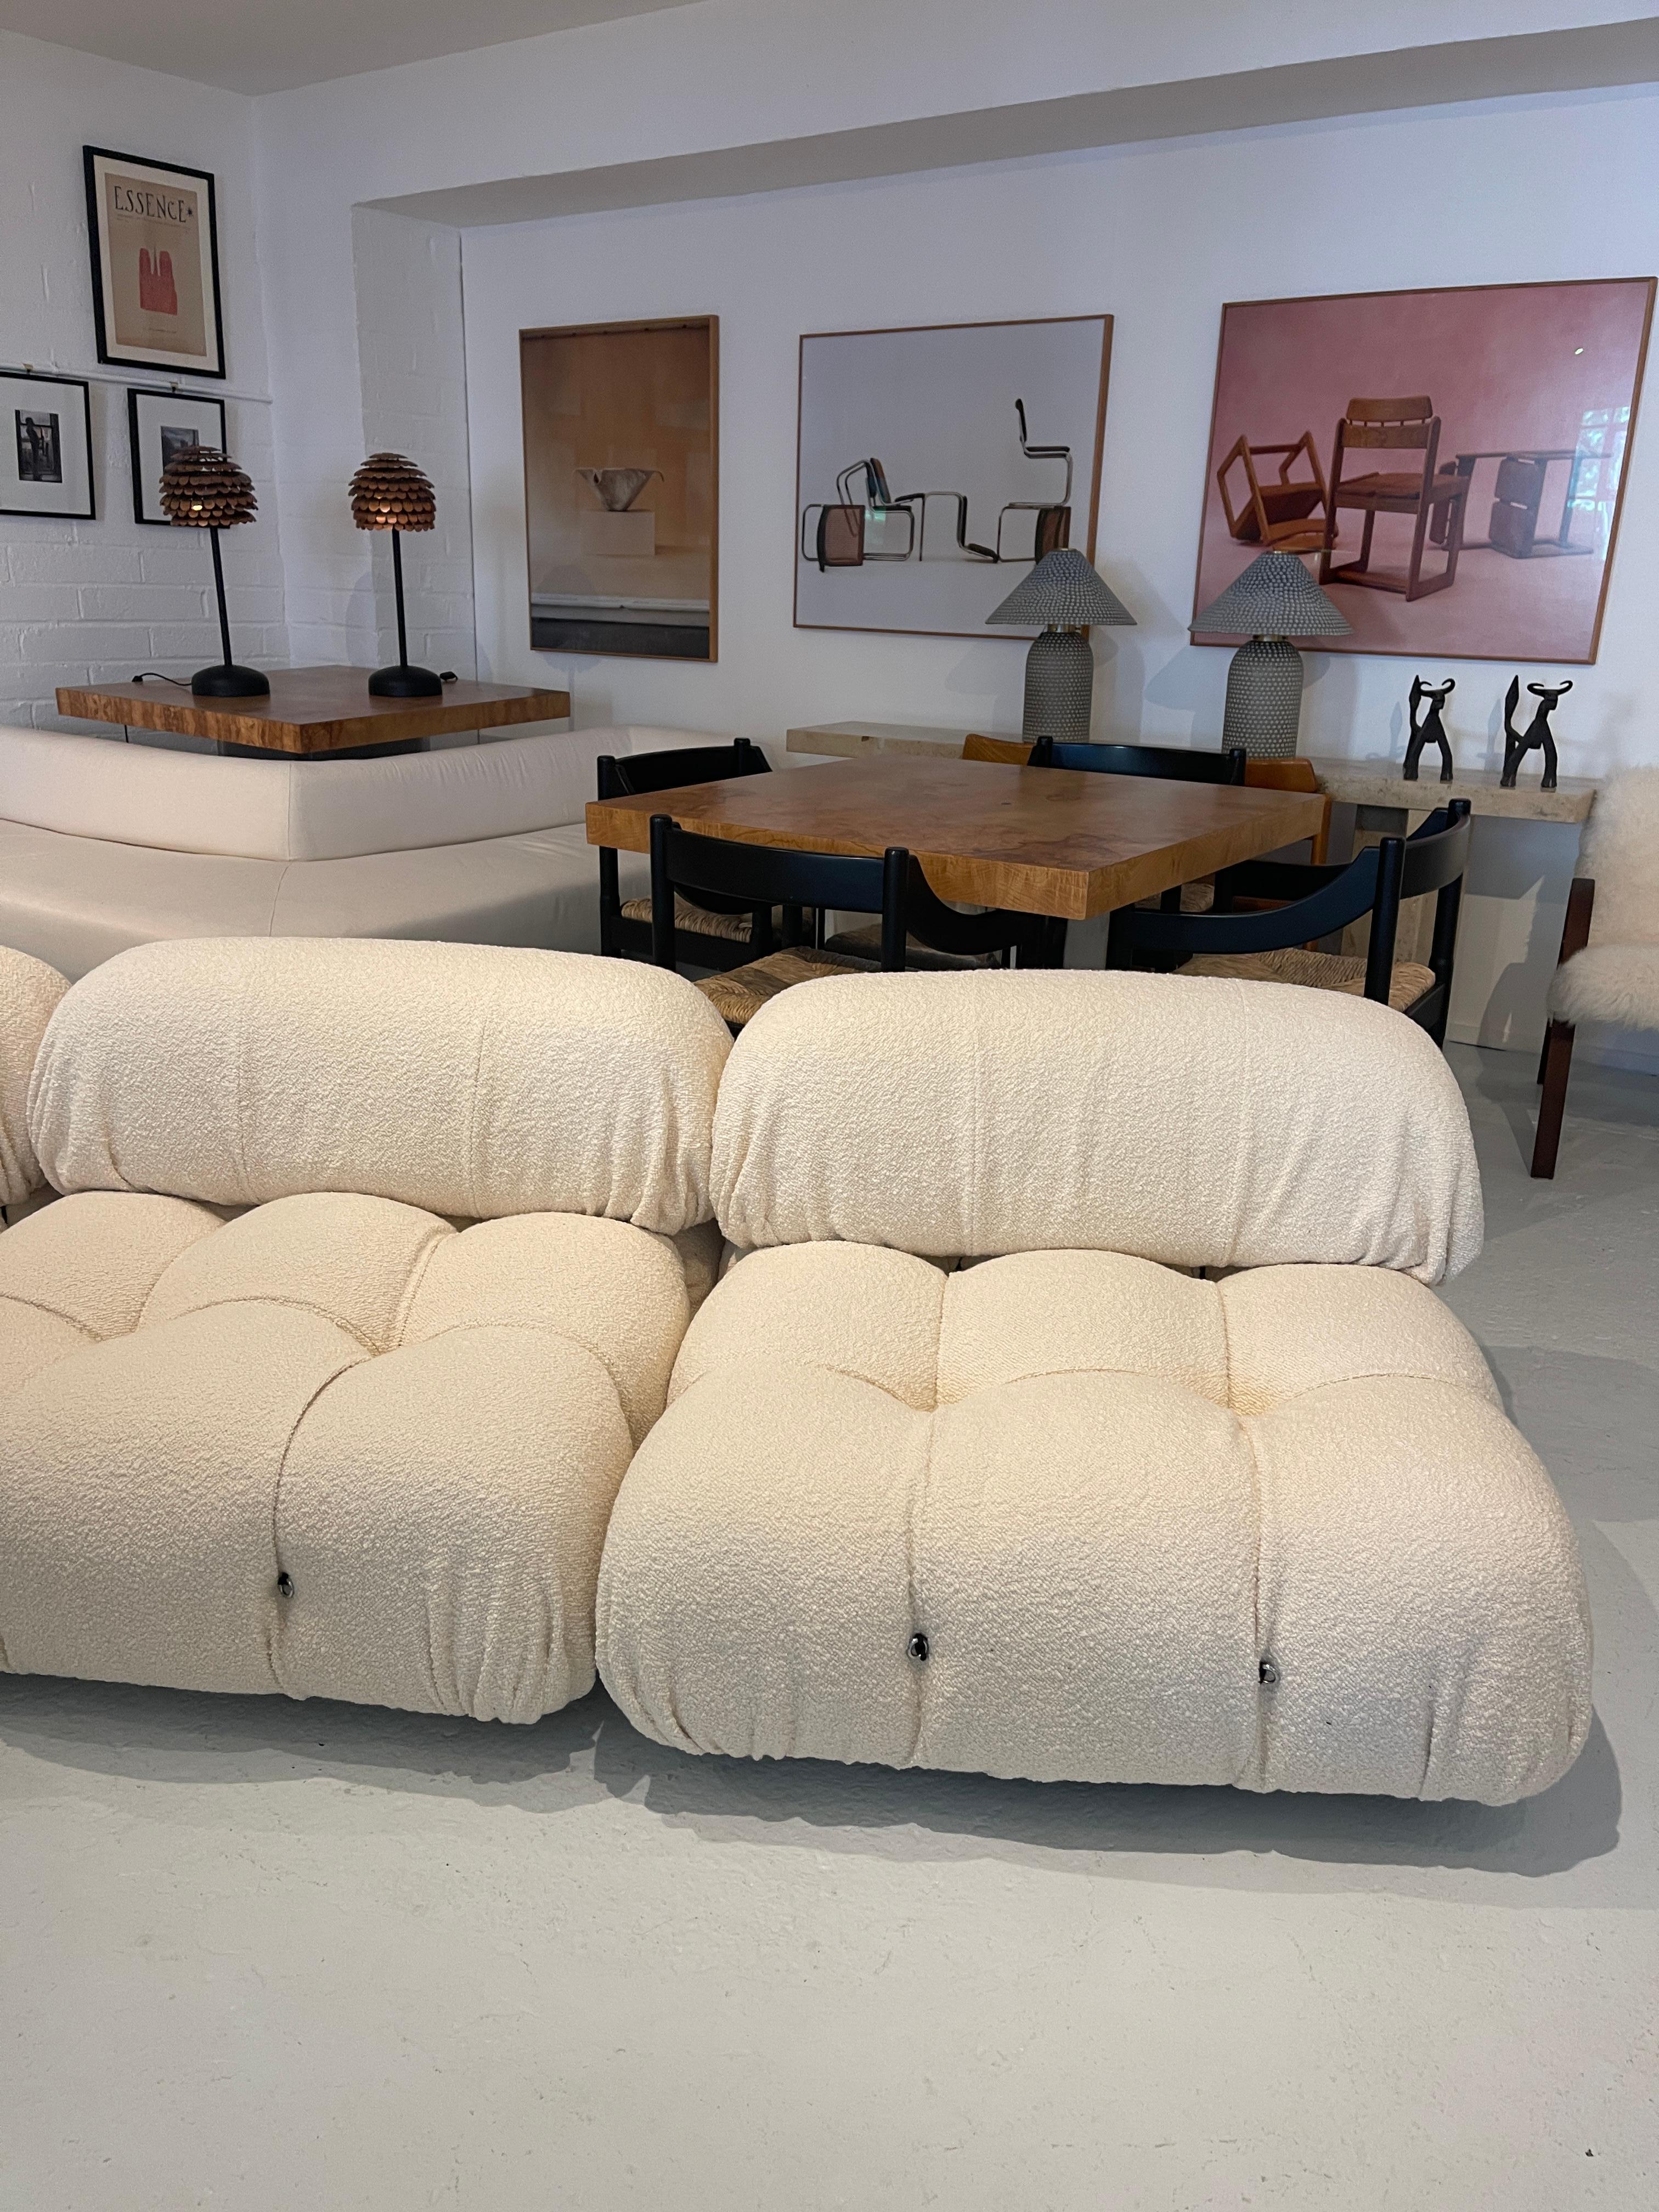 The Camaleonda sofa is a renowned and iconic piece of furniture designed by the Italian architect and designer Mario Bellini in 1970. This modular sofa is celebrated for its unique and innovative design, characterized by its round, oversized